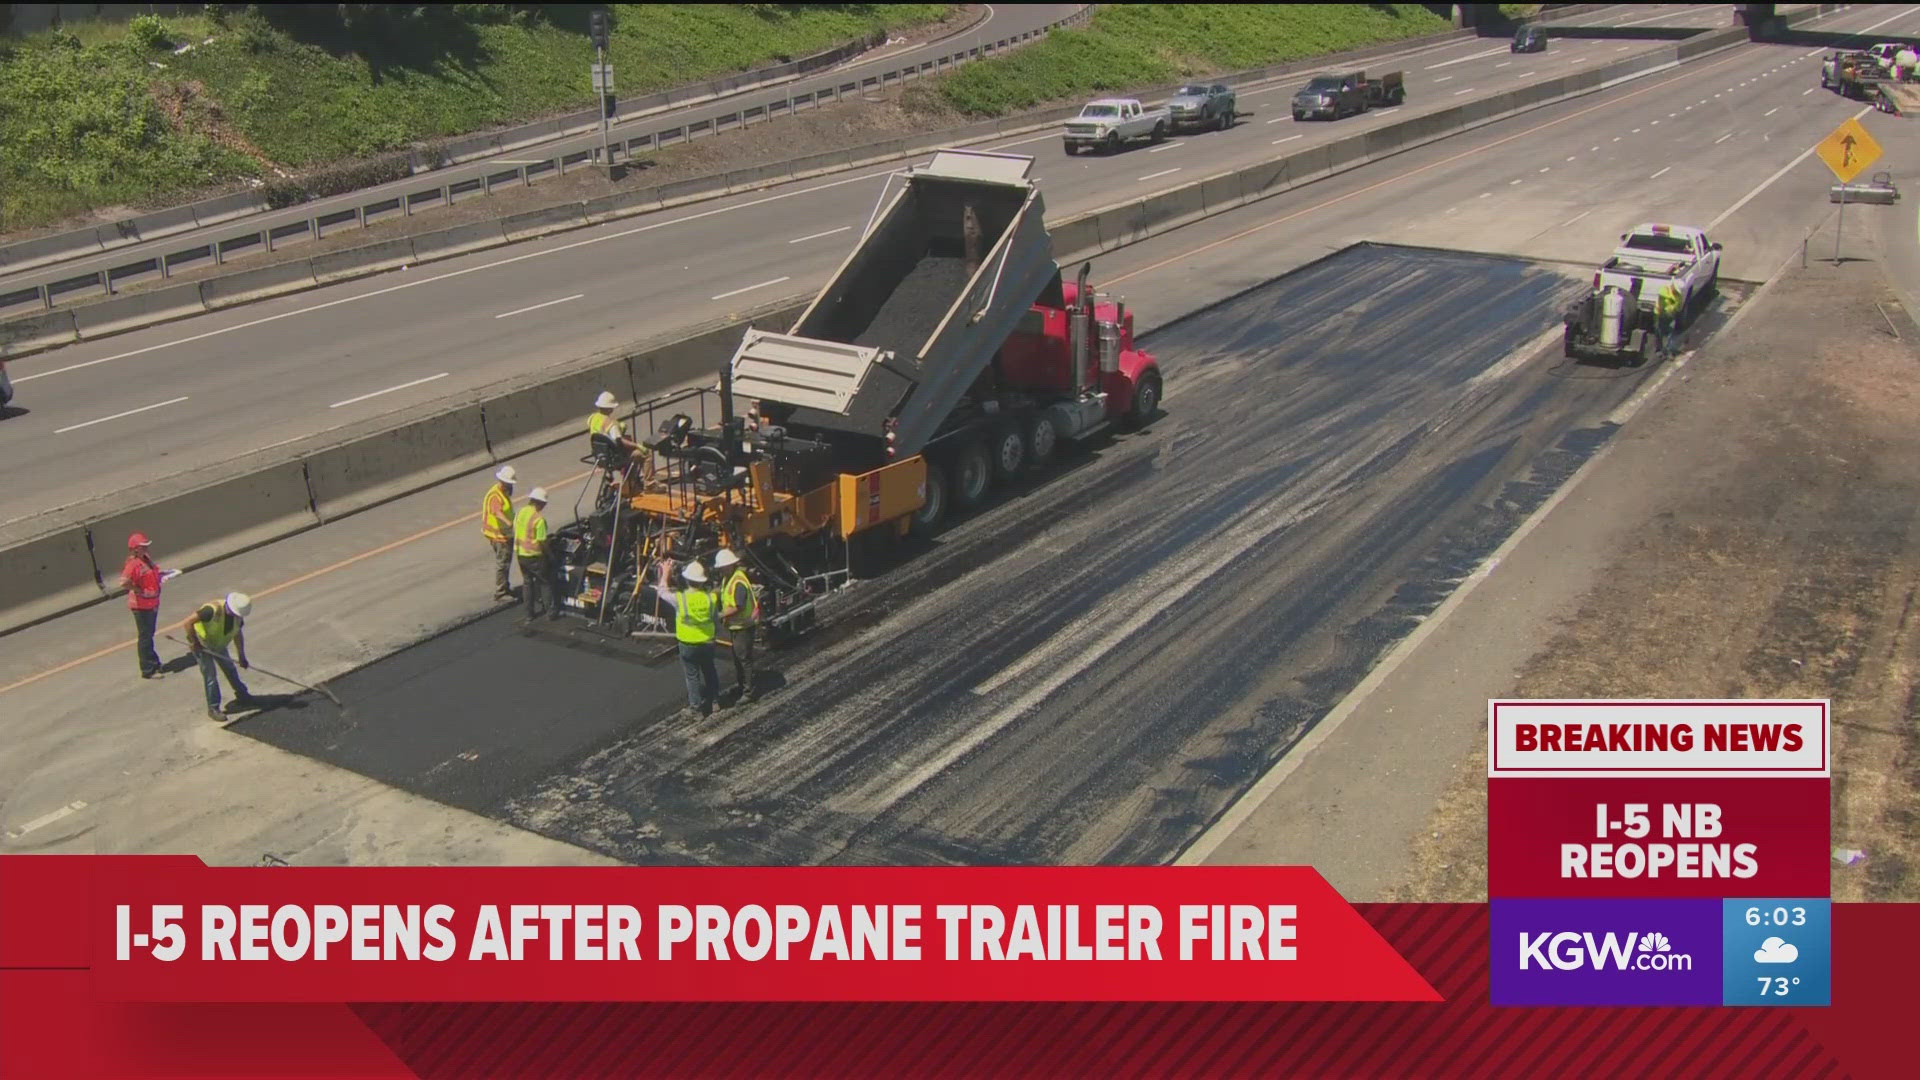 All northbound I-5 lanes in Portland were closed for most of Tuesday after a trailer carrying around 120 propane tanks caught on fire.